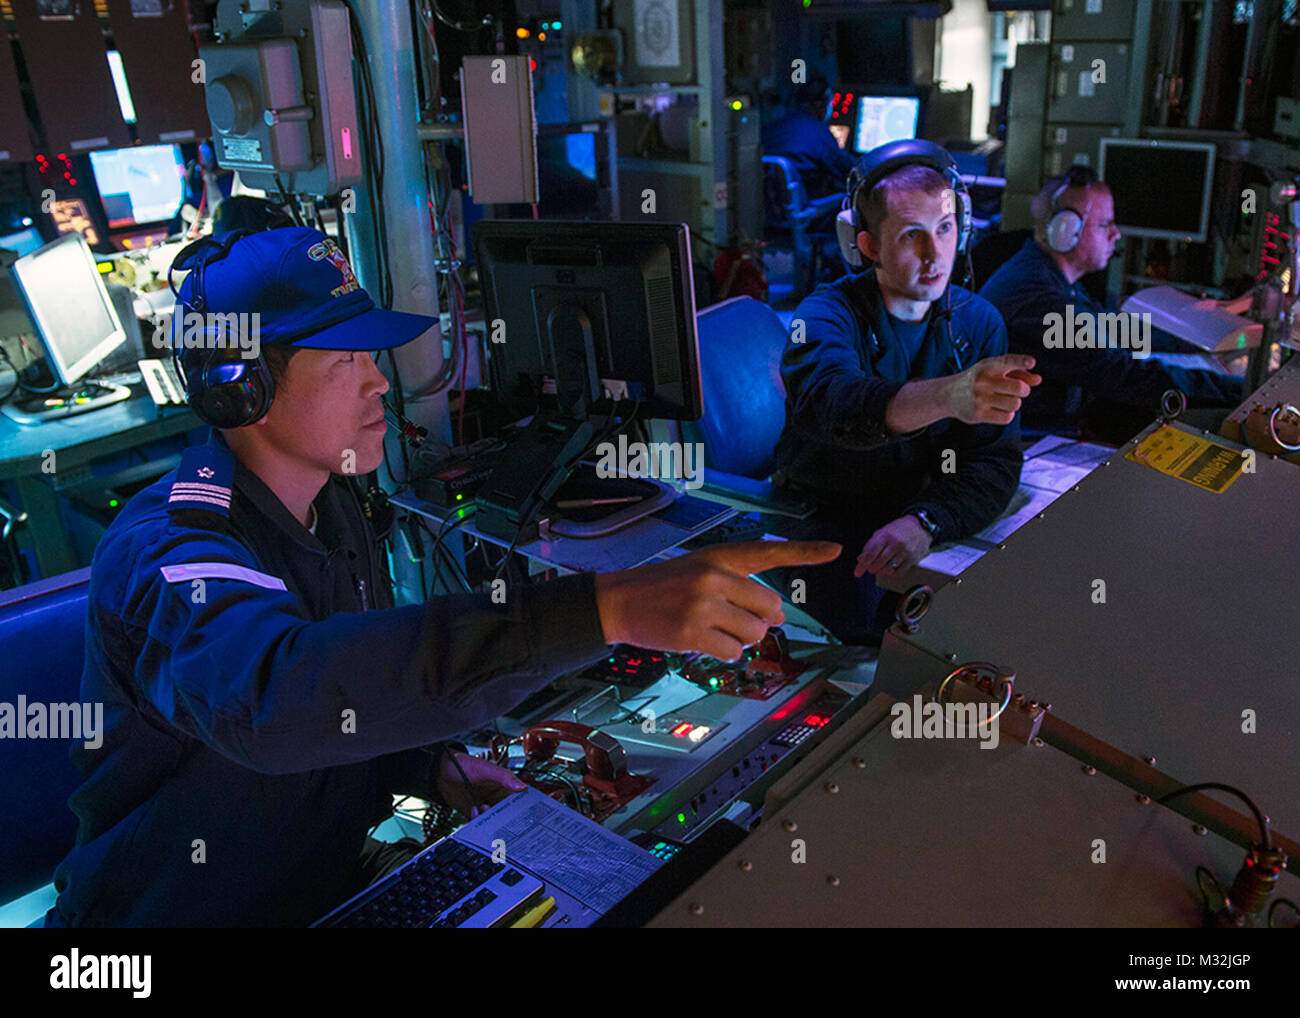 WATERS NEAR GUAM (Mar. 9, 2016) Lt. Thomas Brewer, (right), Chief Engineer of Arliegh Burke-class guided-missile destr160309-N-DJ750-318 WATERS NEAR GUAM (Mar. 9, 2016) Lt. Thomas Brewer, (right), Chief Engineer of Arliegh Burke-class guided-missile destroyer USS McCampbell (DDG 85), and Japan Maritime Self-Defense Force (JMSDF) Lt. Cmdr. Hironori Ikeda, of JMSDF Chief staff, Escort Division 6, discuss tactical data from the Combat Information Center (CIC) during Multi Sail 2016. Multi Sail is a bilateral training exercise aimed at interoperability between the U.S. and Japanese forces. This ex Stock Photo